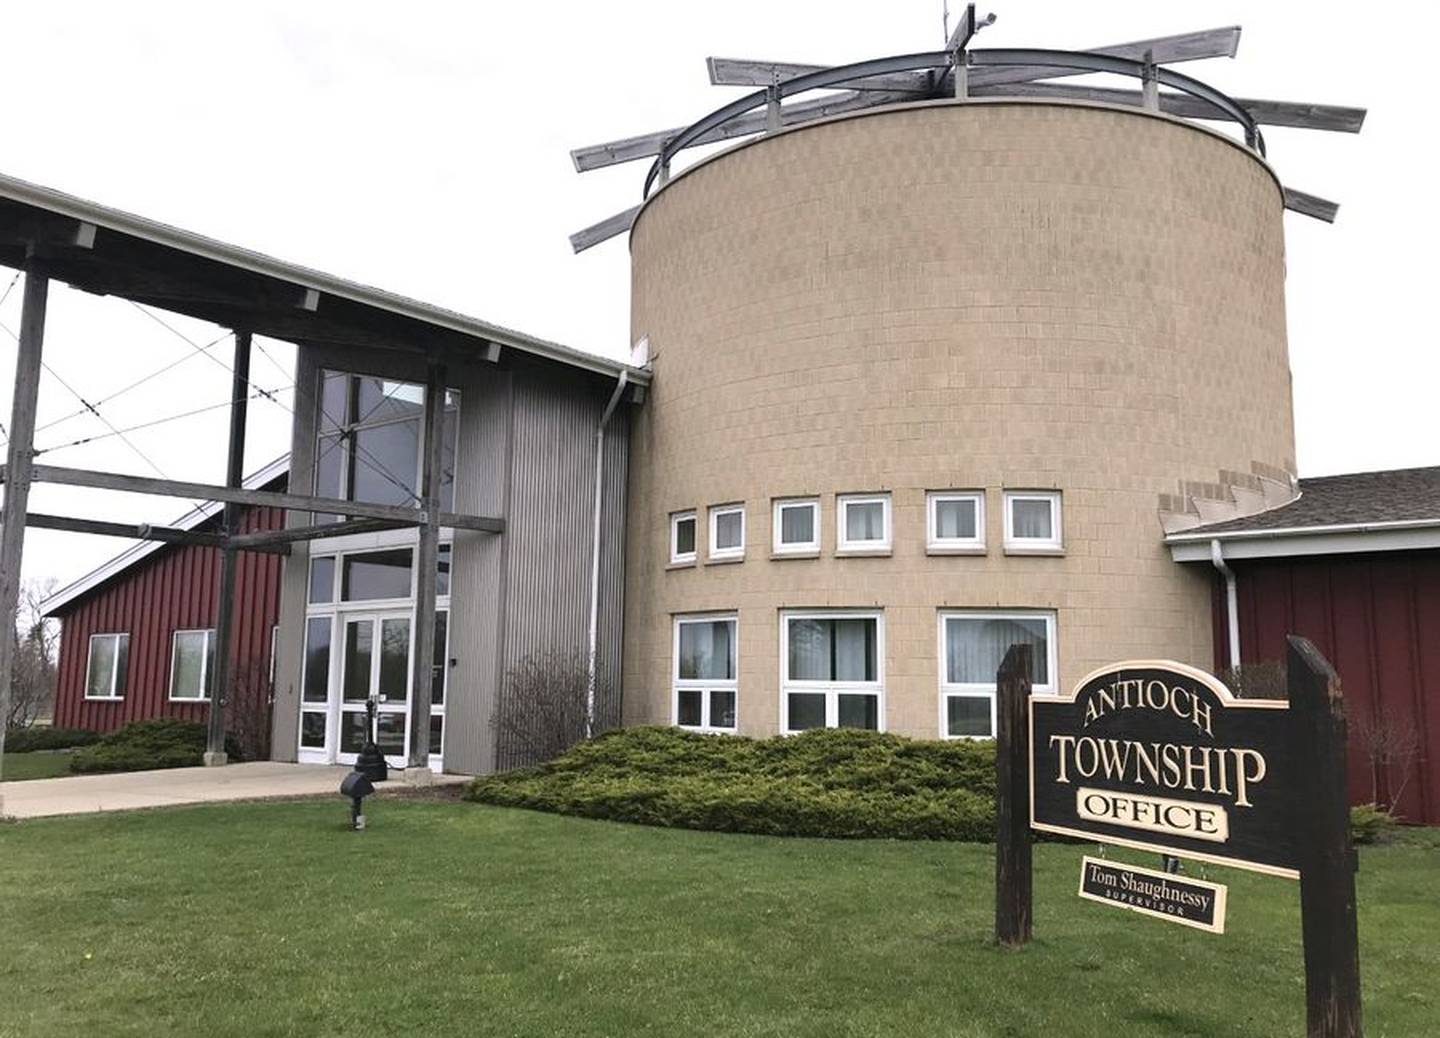 Antioch Township will assume responsibility for Antioch's senior programs and services. Officials say the move will provide more offerings at lesser cost.